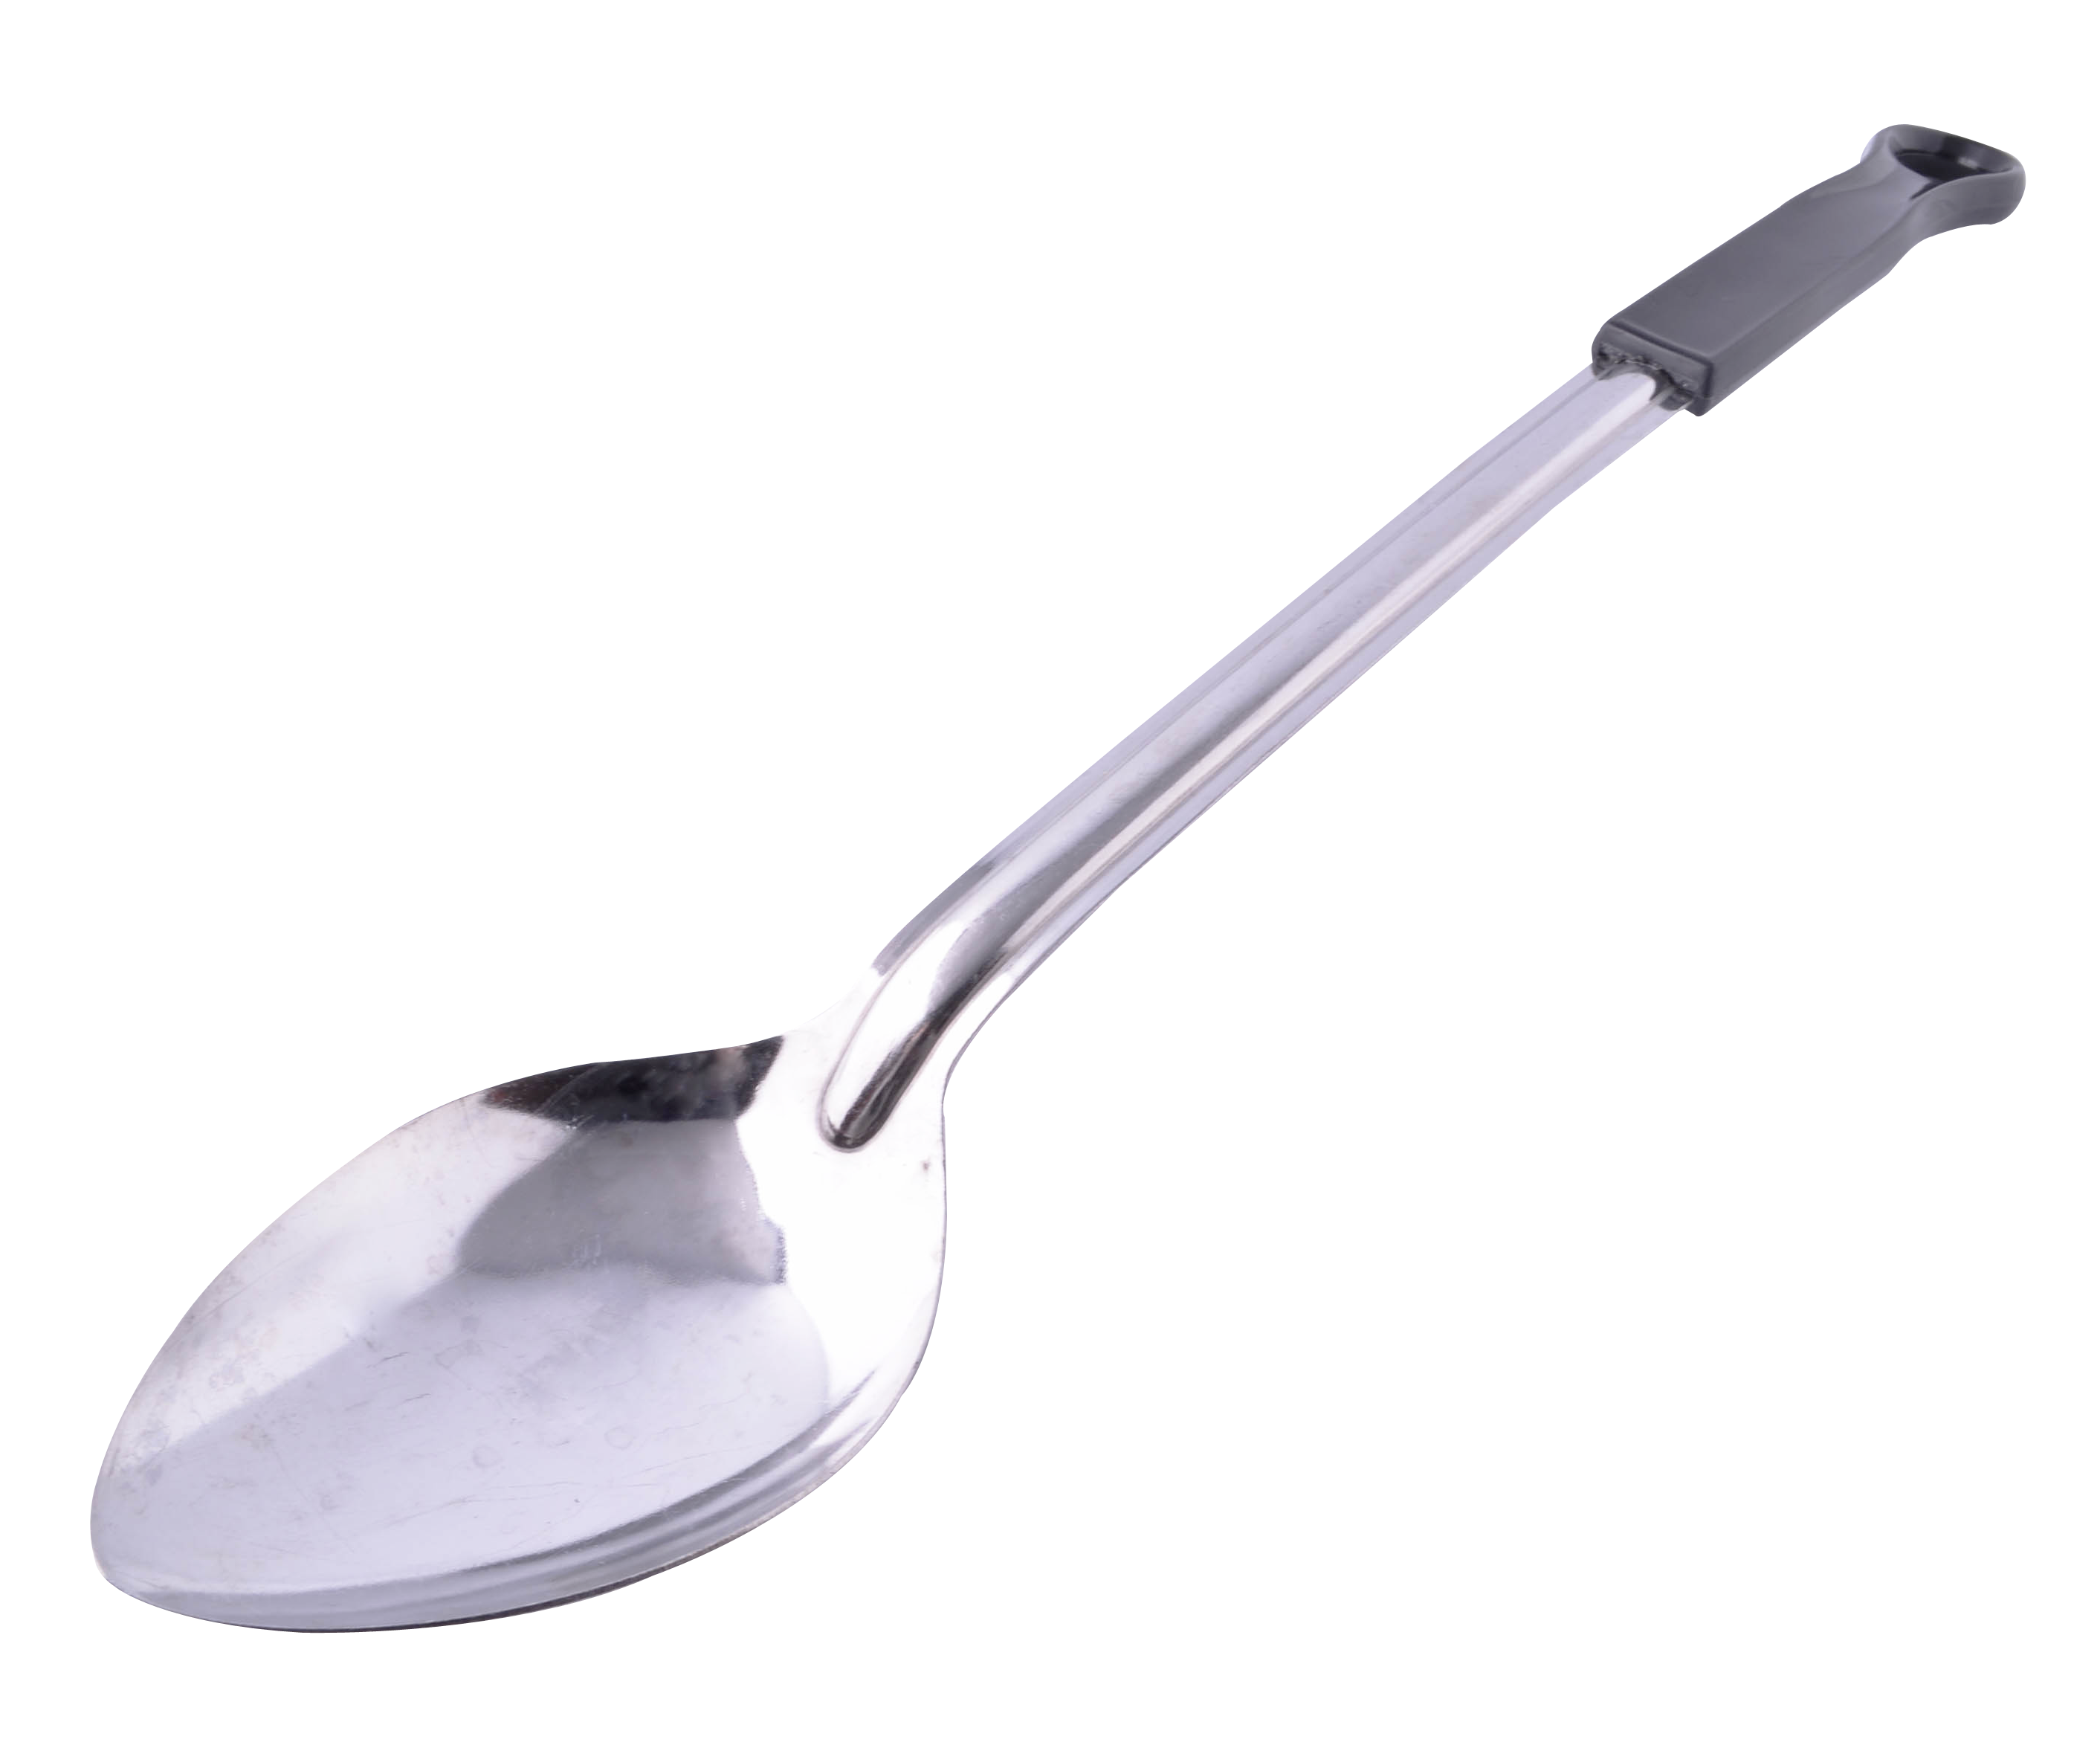 Spoon Png Transparent Image - Spoon, Transparent background PNG HD thumbnail